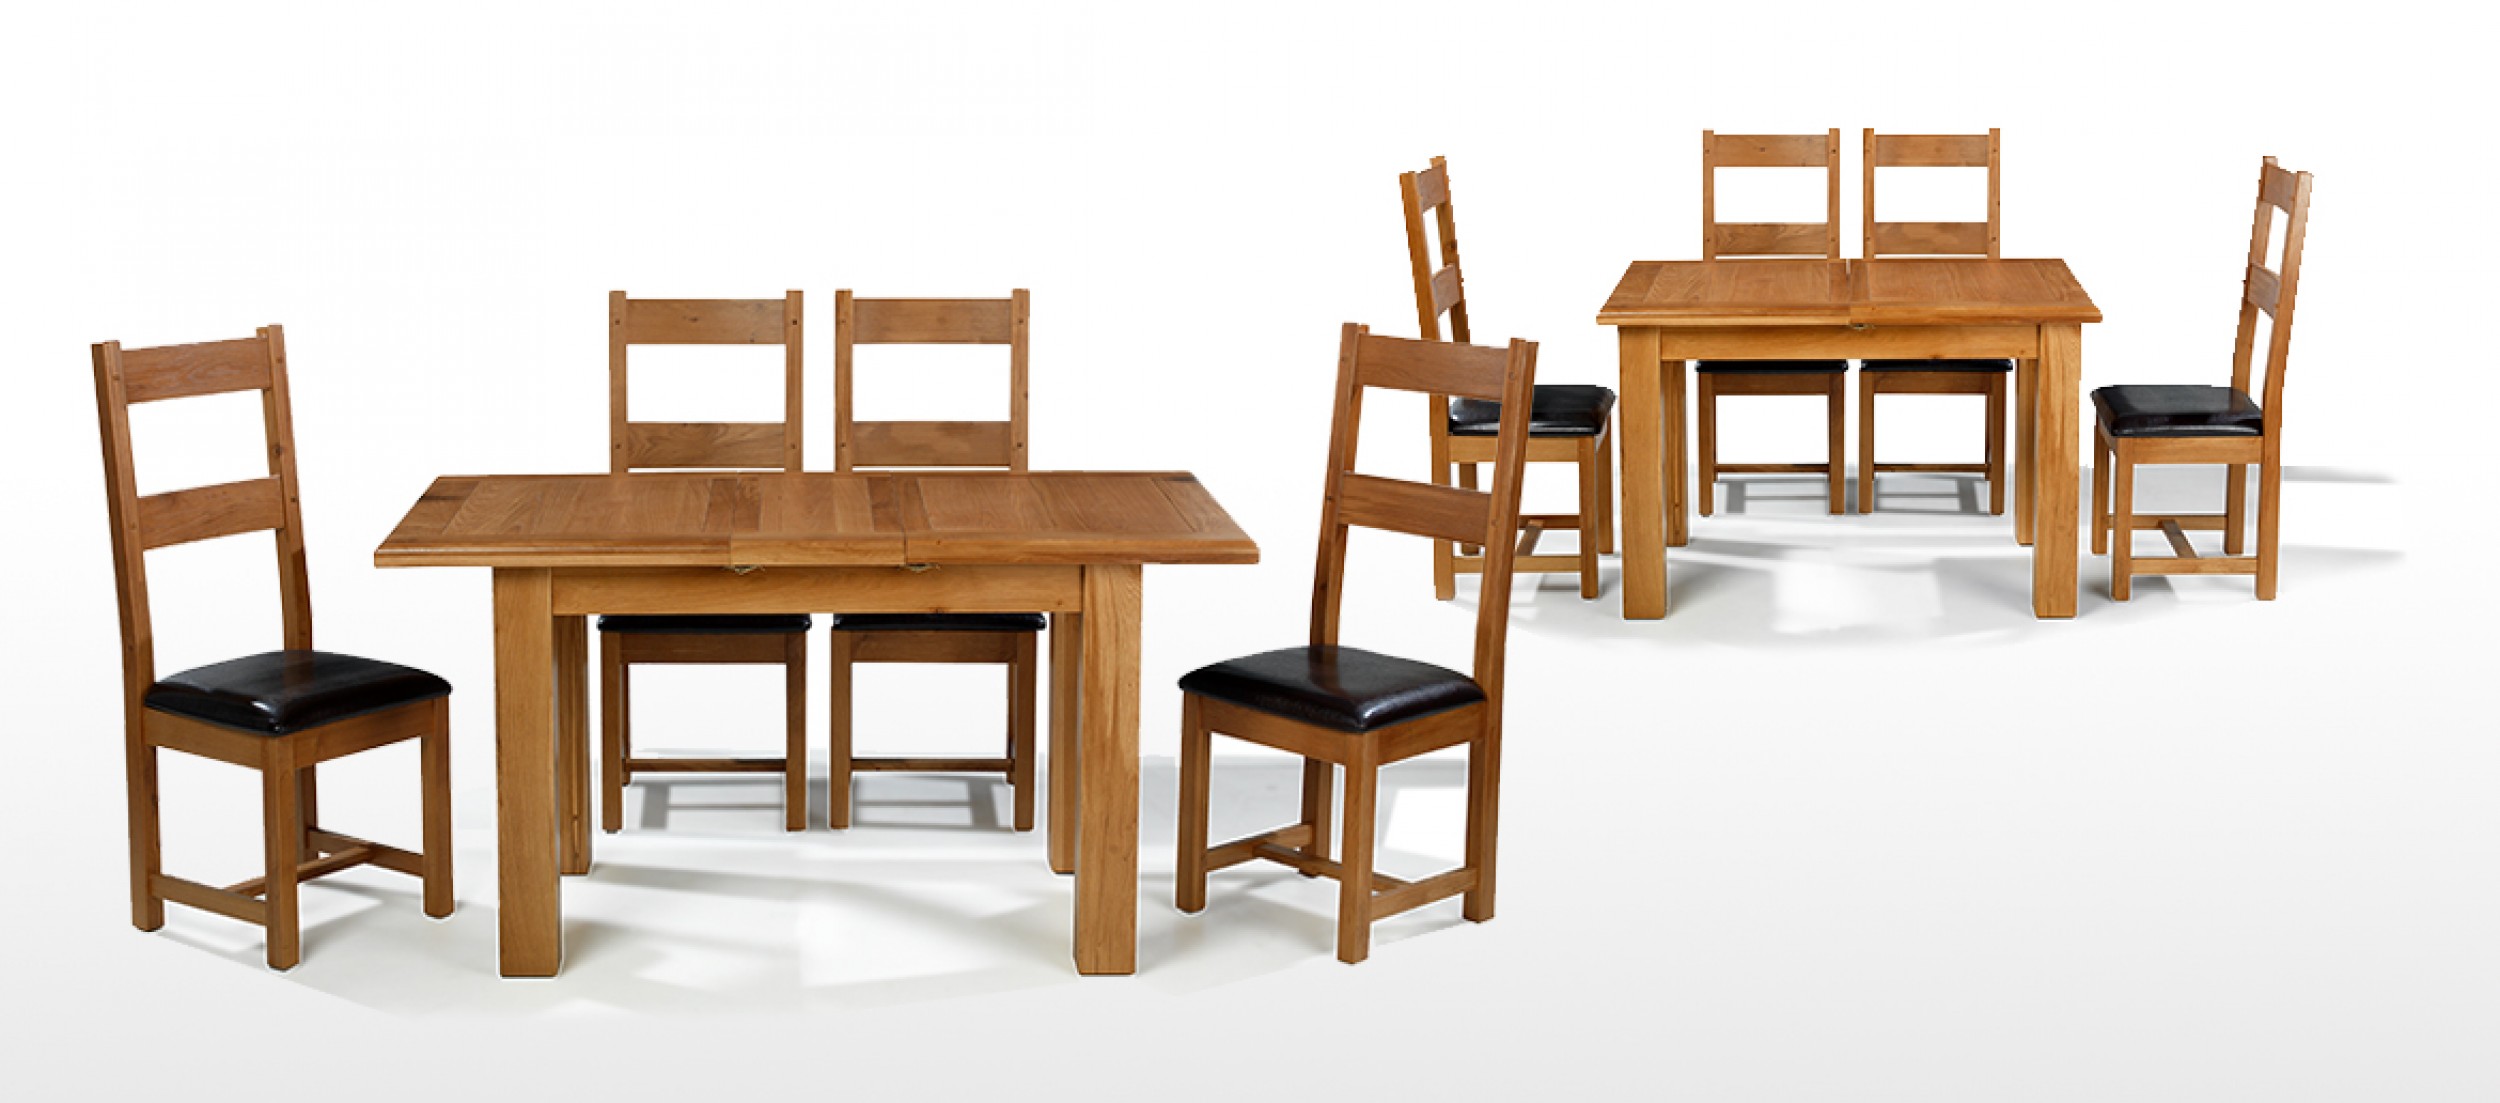 Barham Oak 120-150 cm Extending Dining Table and 4 Chairs | Quercus Living